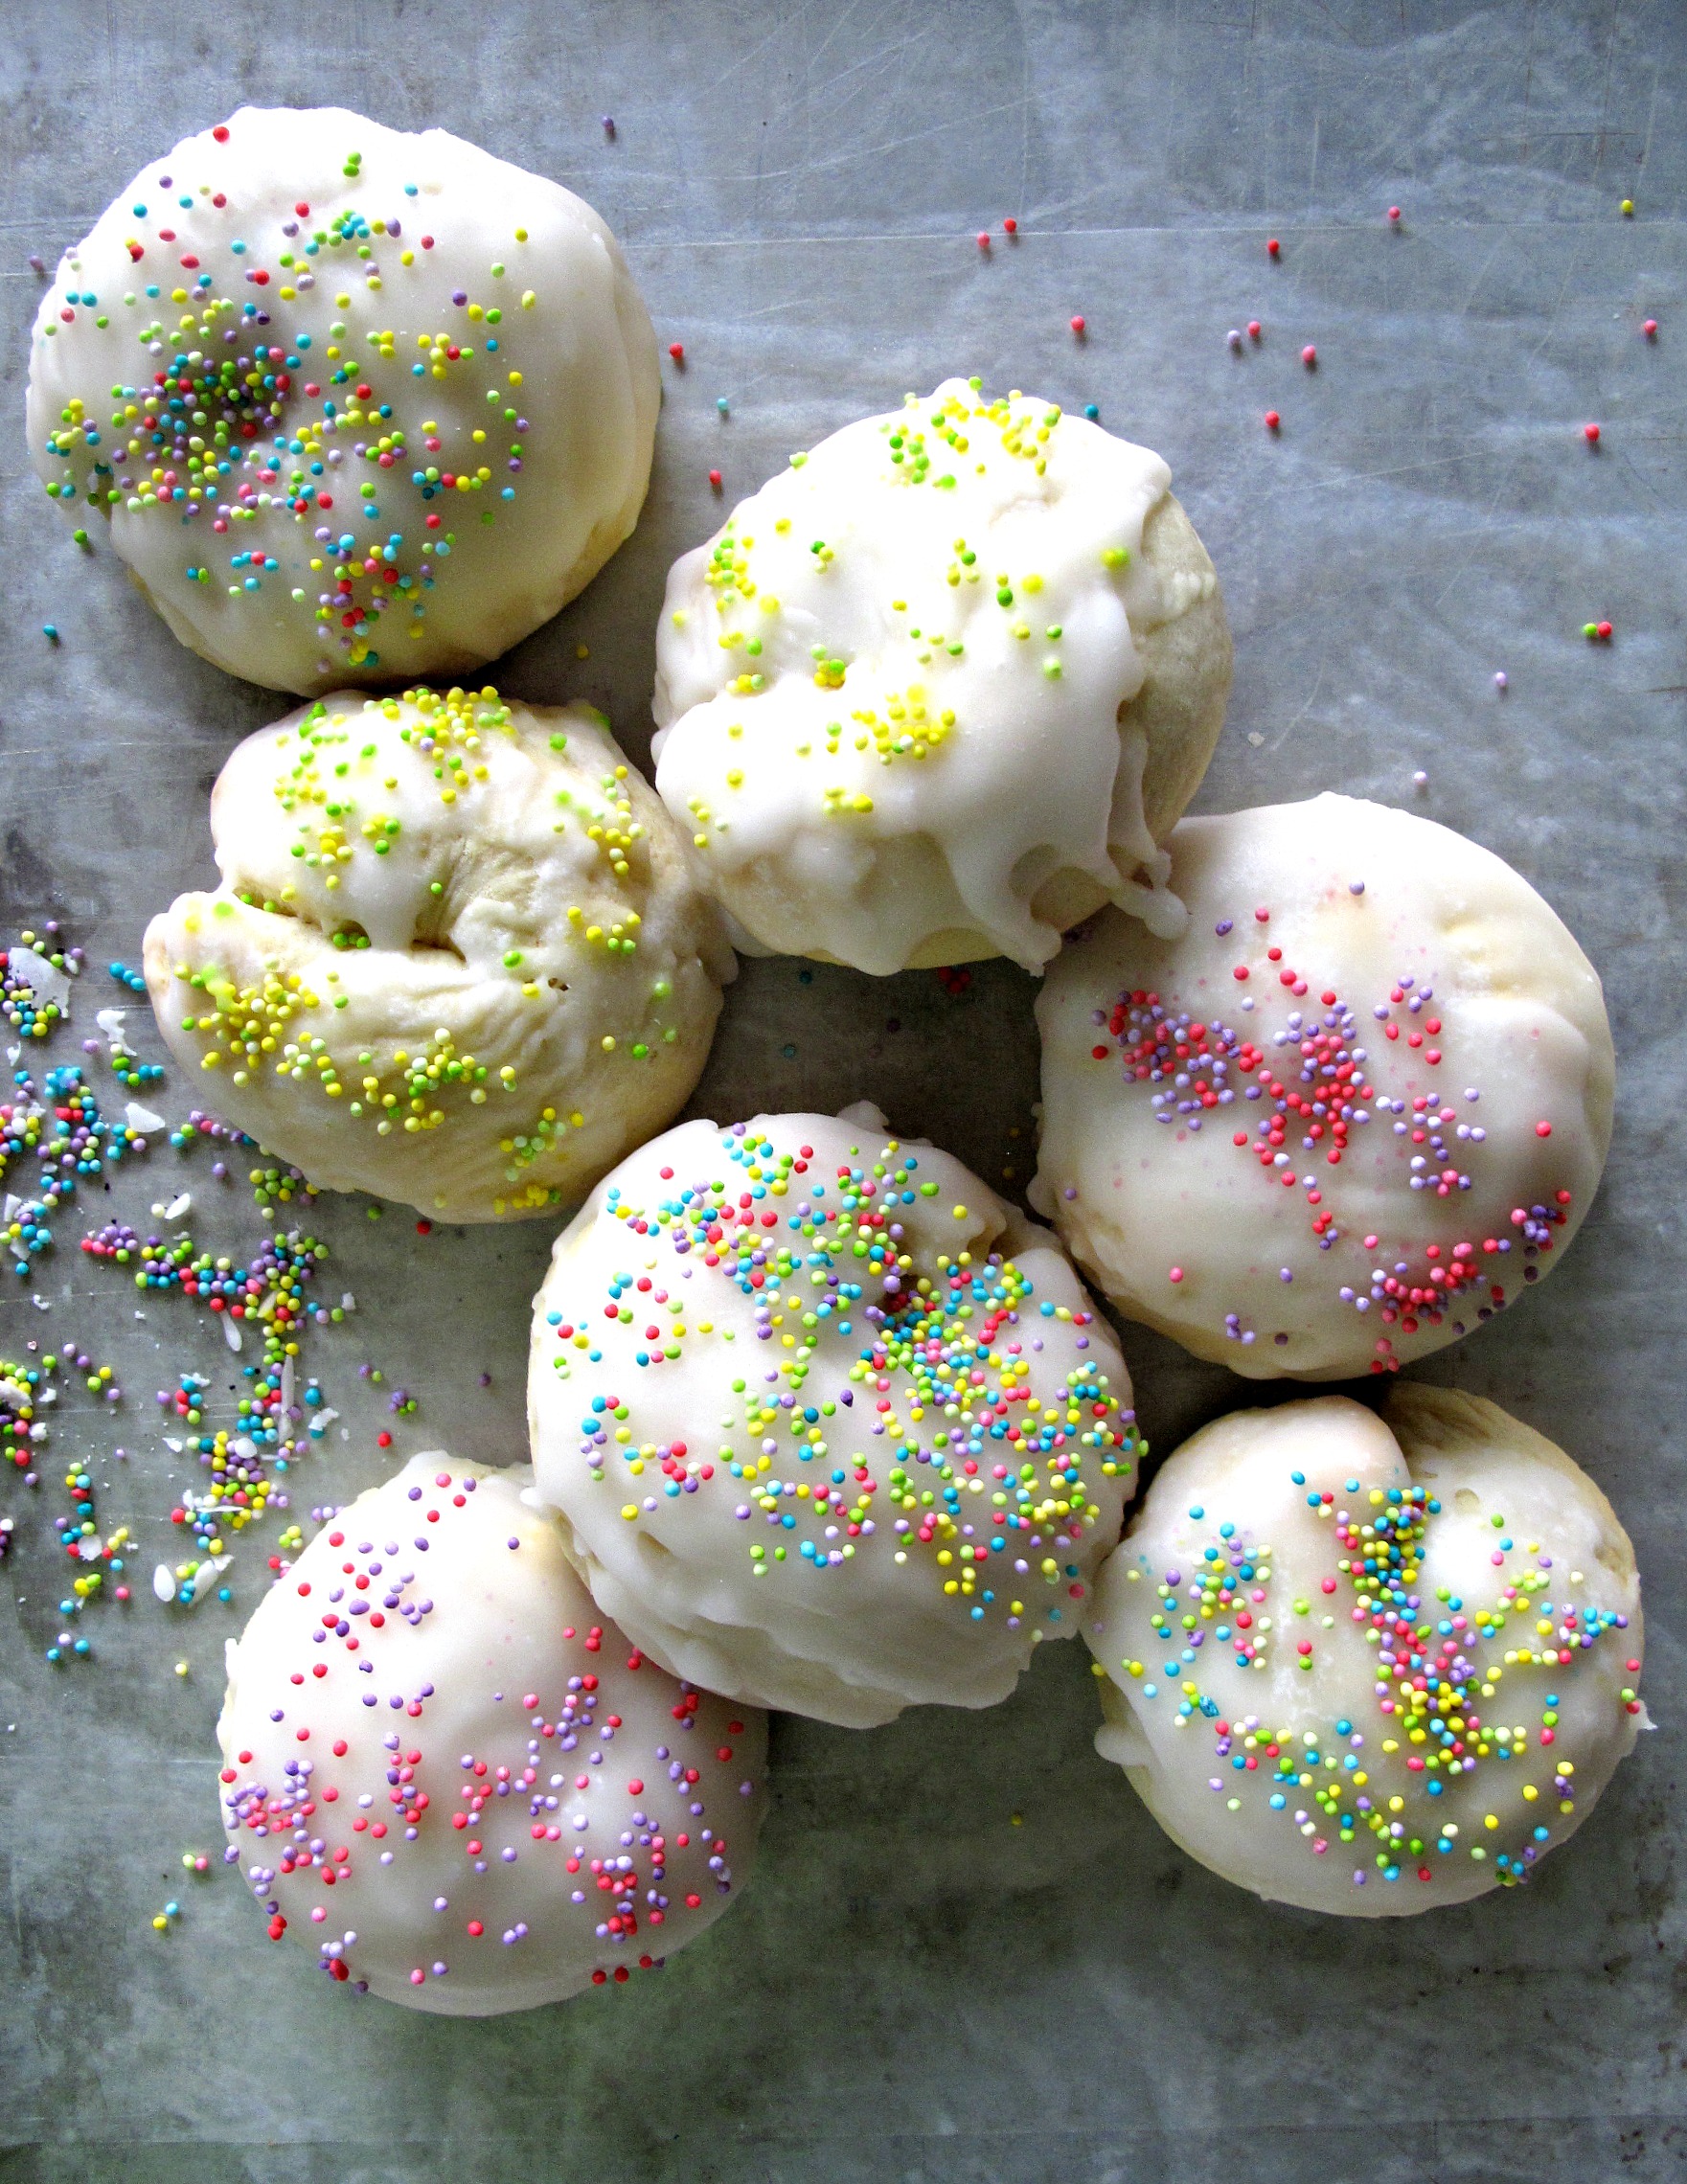 Italian Easter Cookies (Taralli Dolce Di Pasqua), puffy, ball shaped and iced with pastel nonpareil sprinkles.